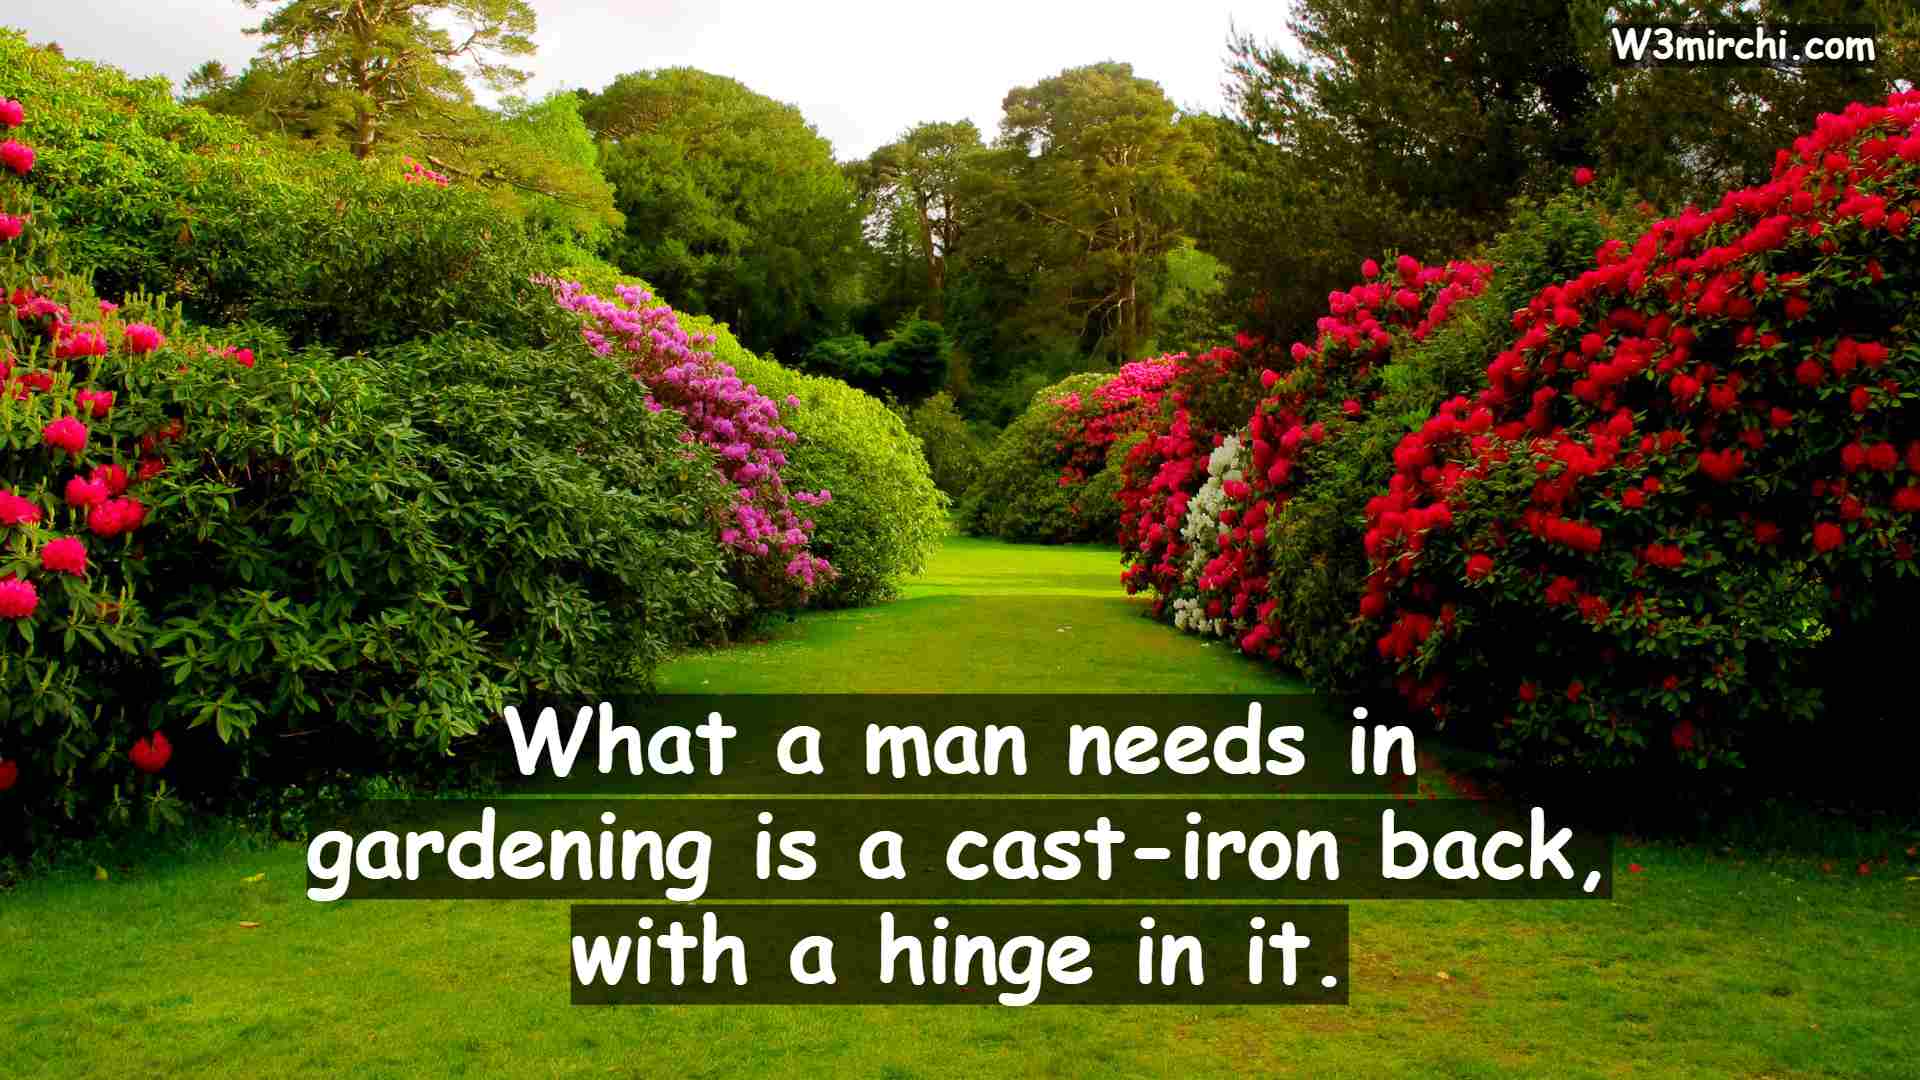 What a man needs in gardening is